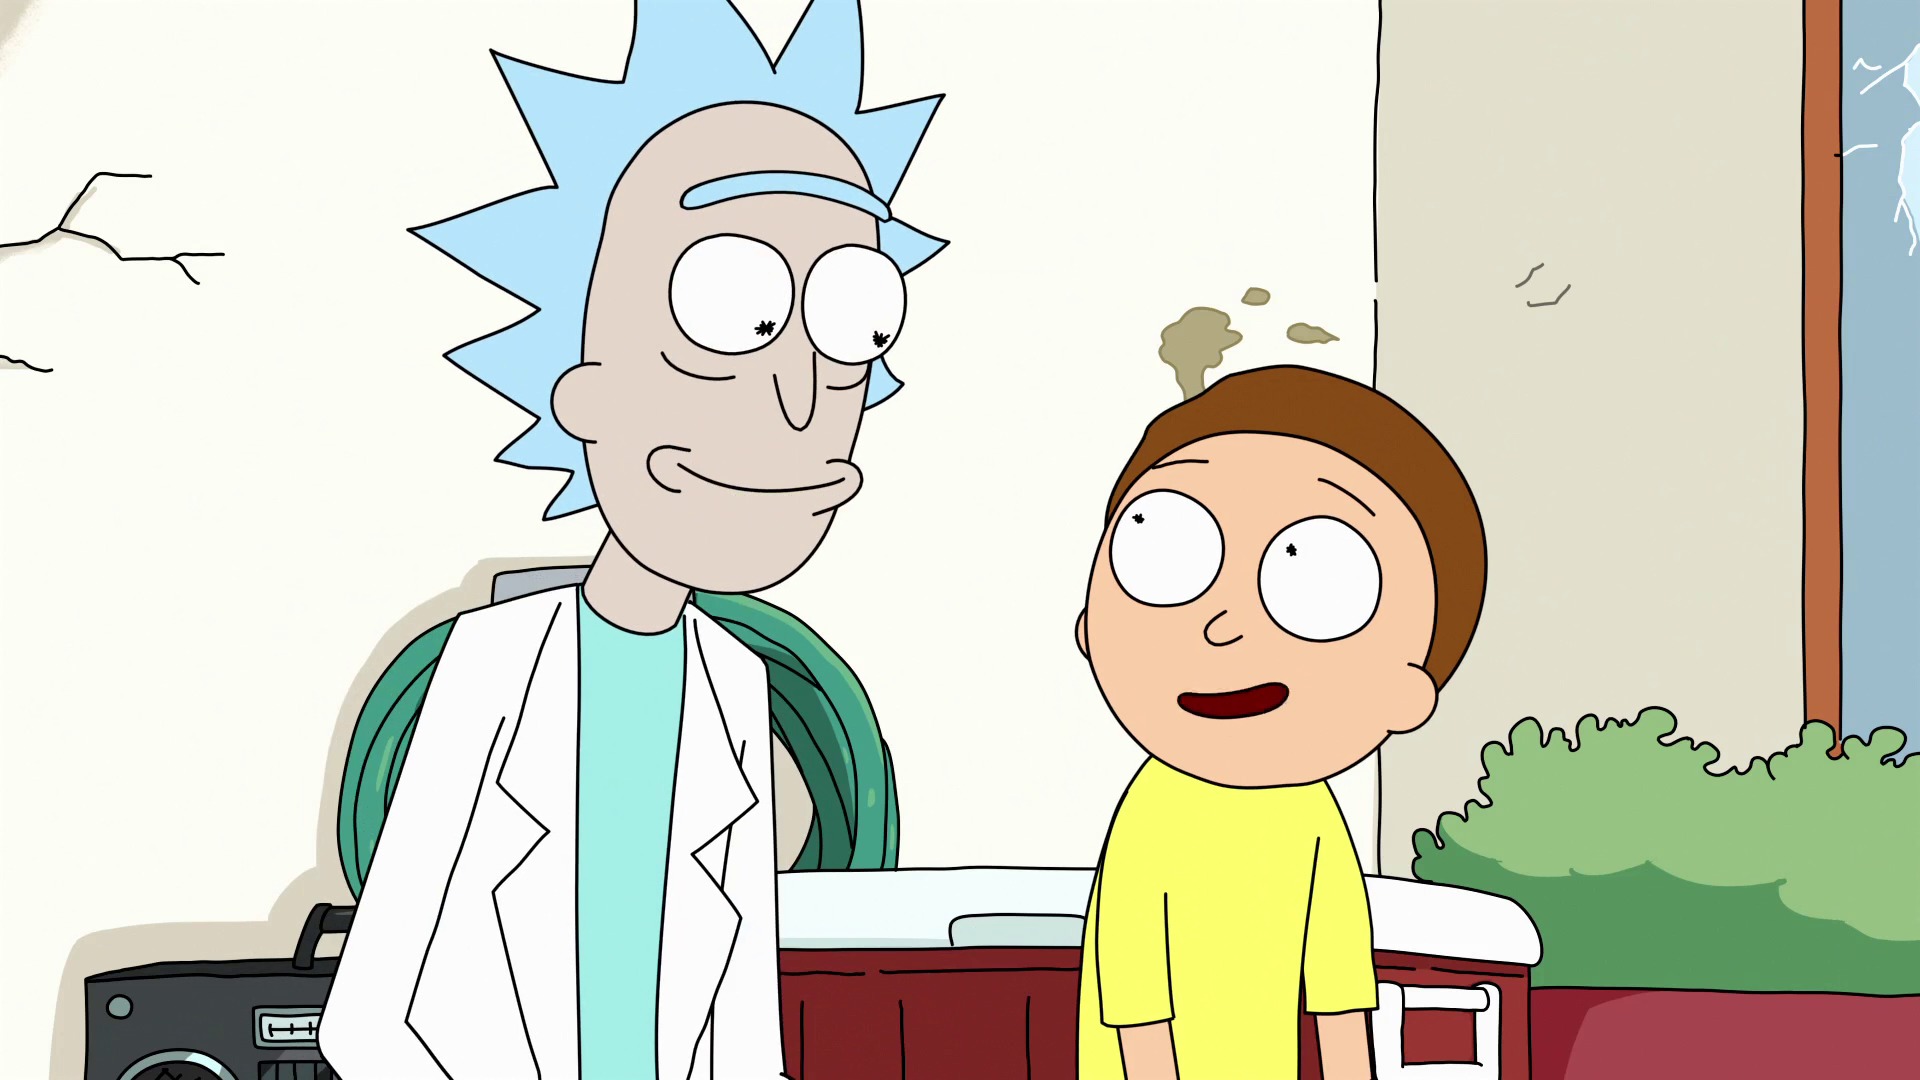 Rick and Morty Season 4 Episode 6 Release Date Hinted by Creators Justin Roiland and Dan Harmon